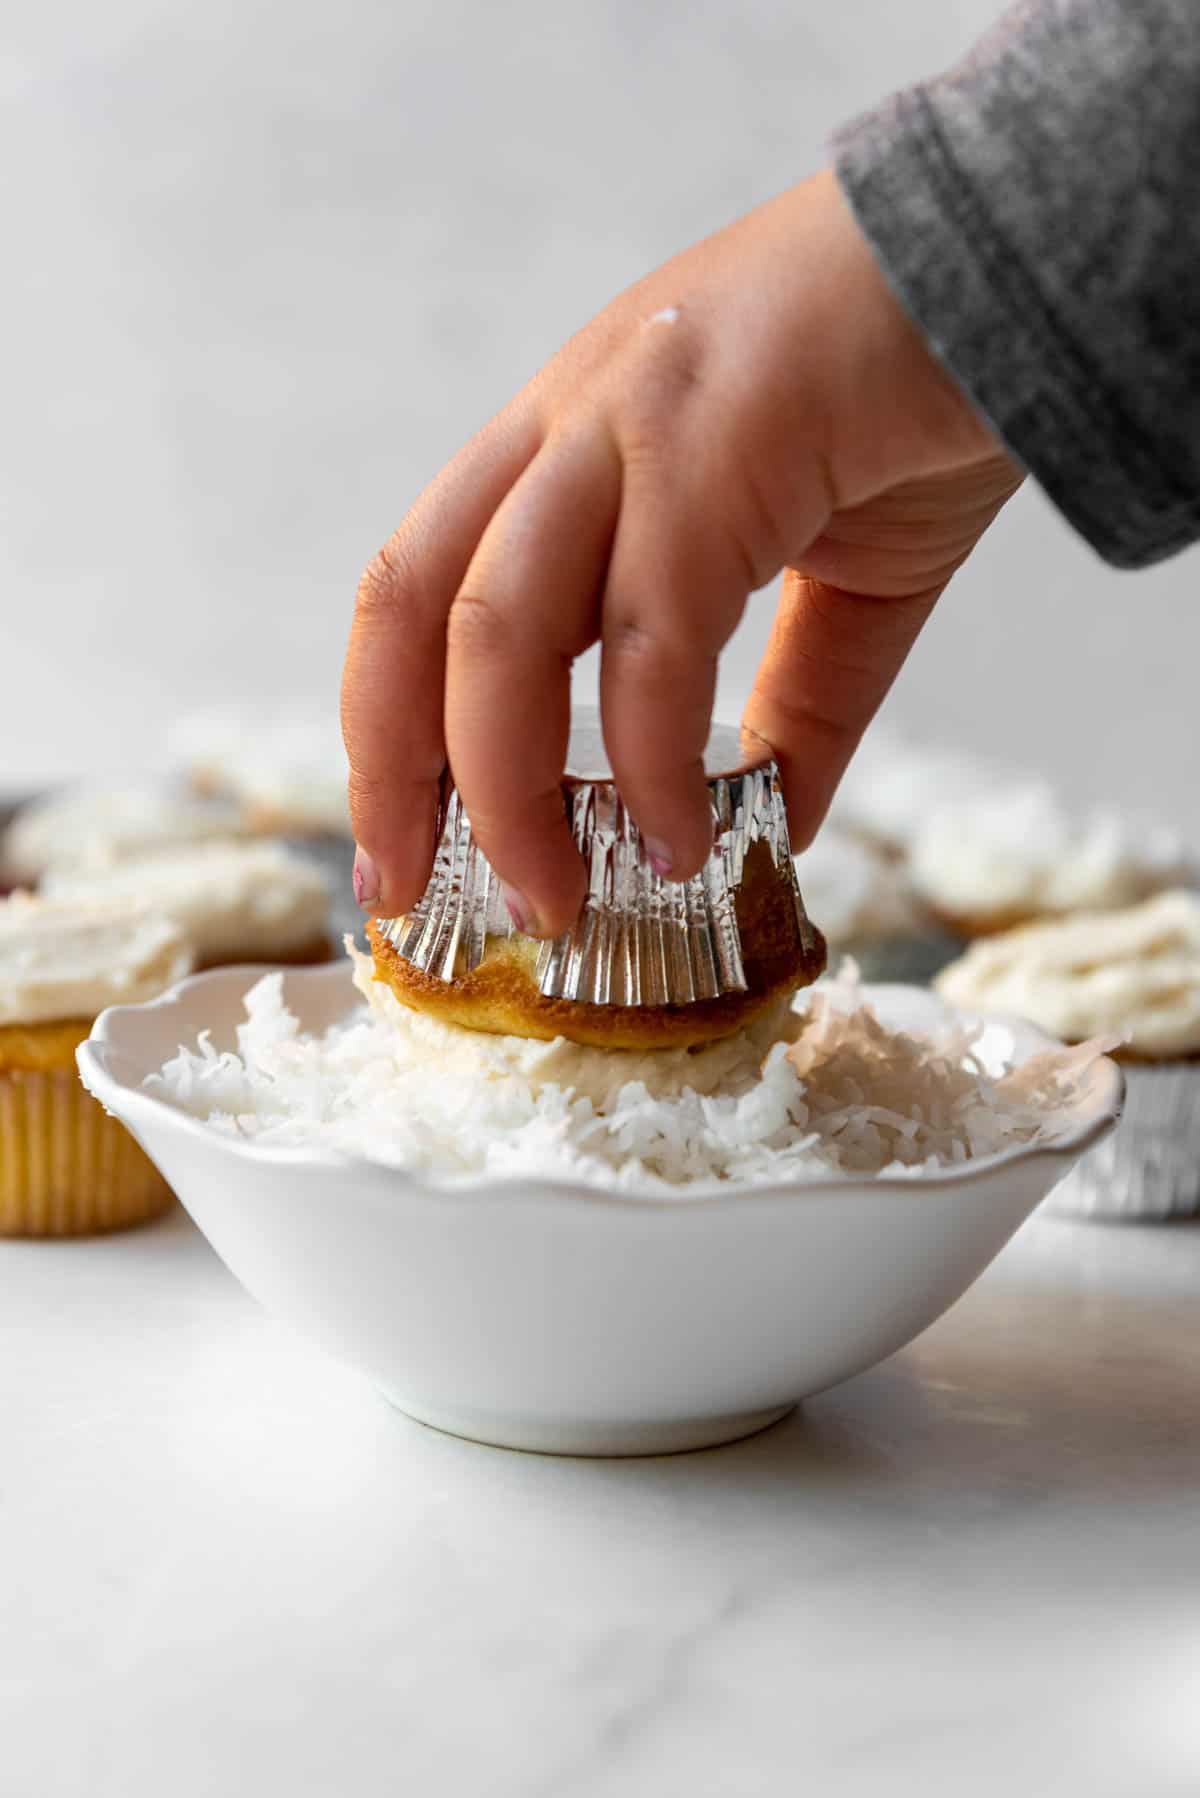 A hand dipping a frosted coconut cupcake into a bowl of shredded sweetened coconut.